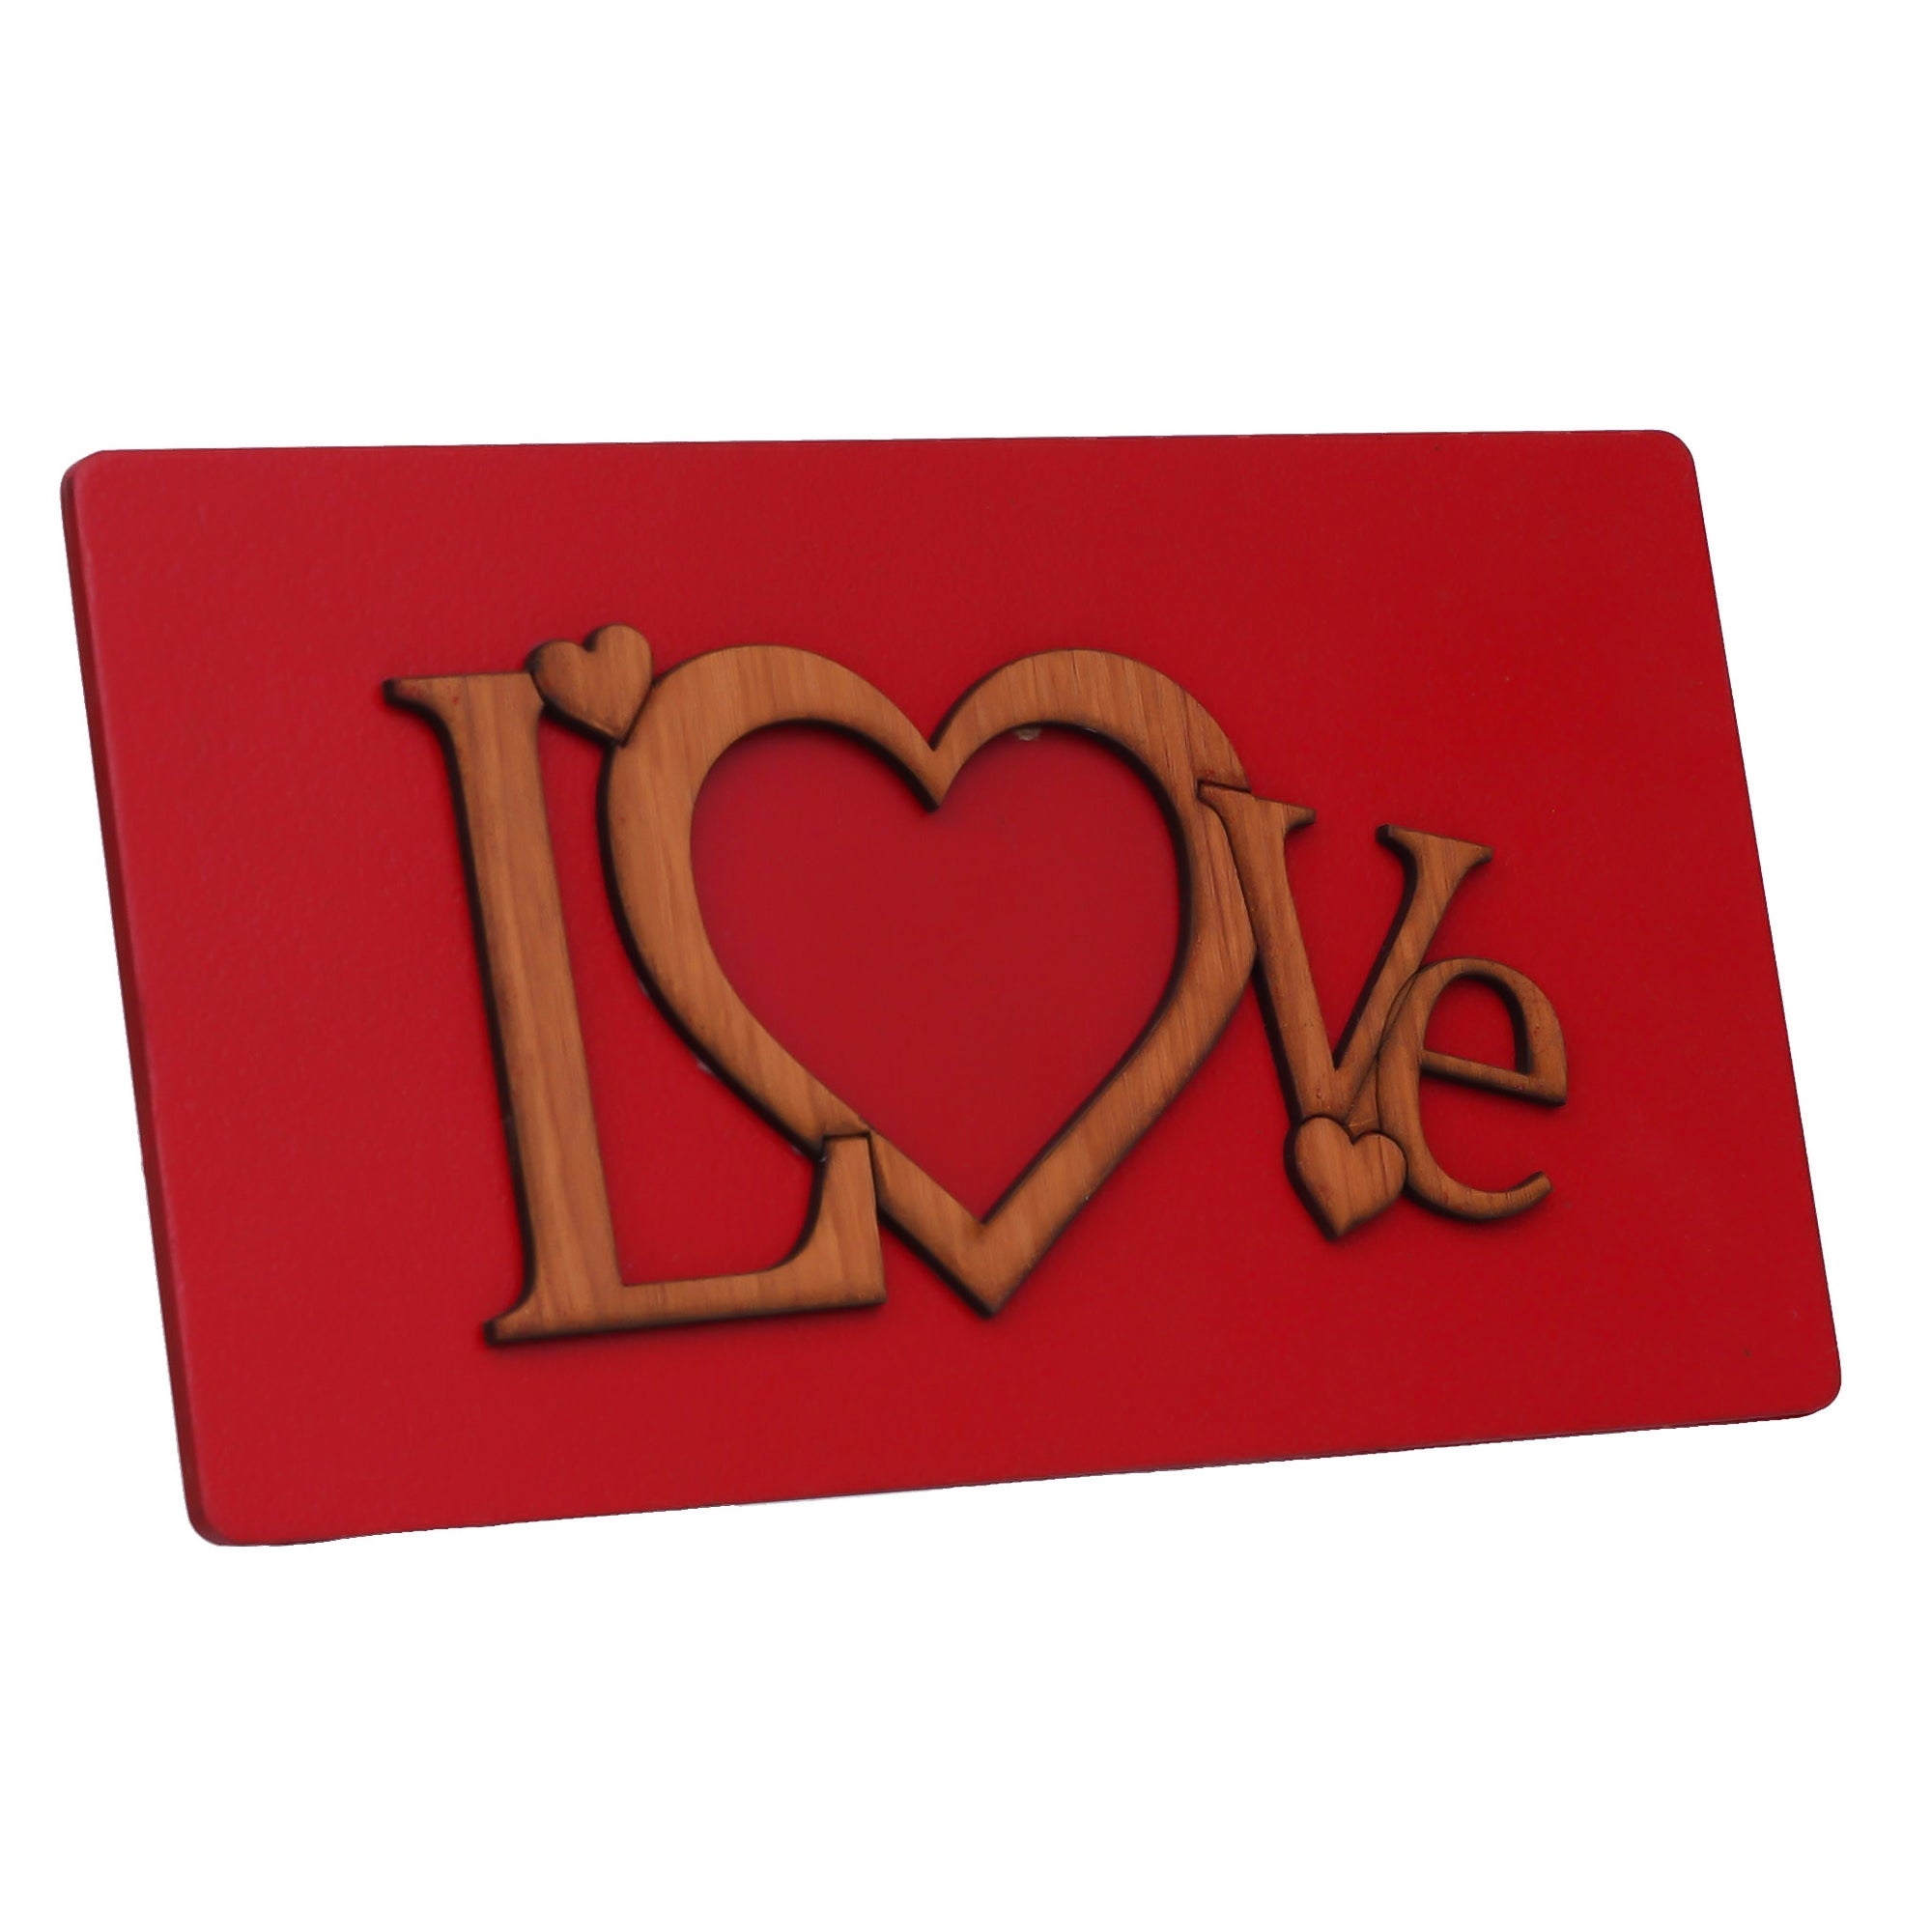 Valentine Combo of "Love" Wooden Photo Frame With Red Stand, Colorful Girl and Boy "Sweet I Love You" Kissing Figurine 5